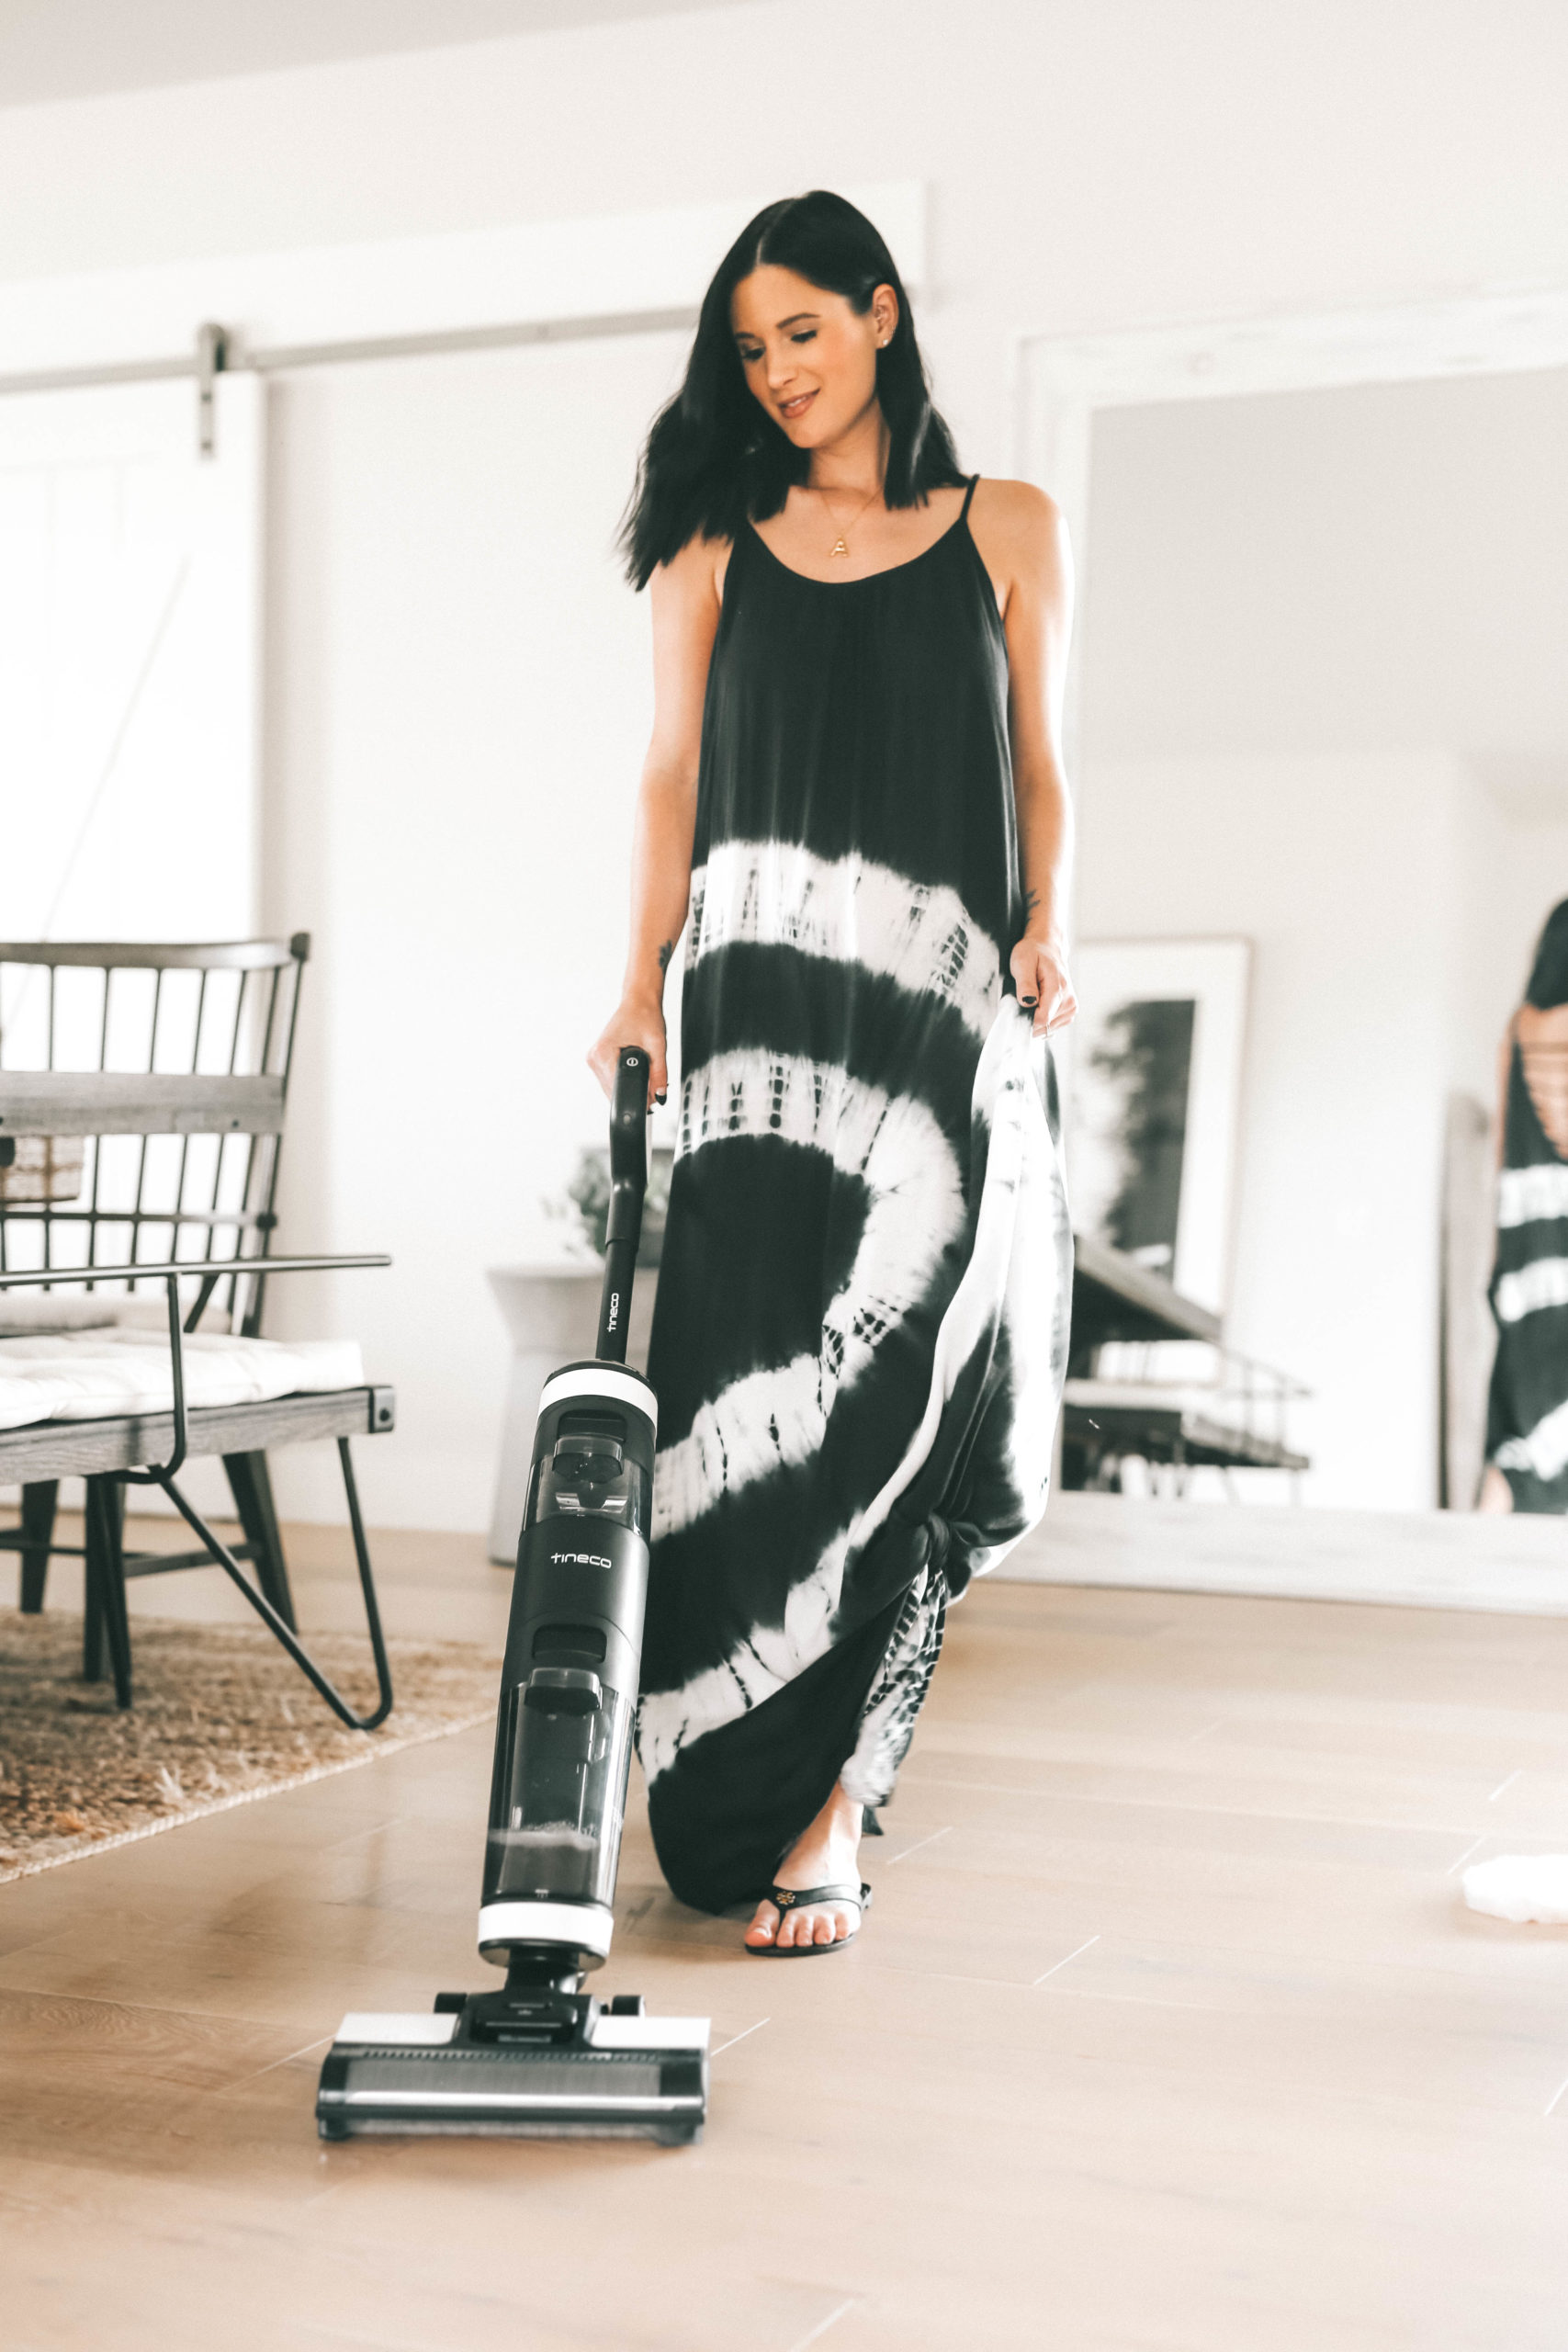 Tineco Floor One S3 by popular Austin lifestyle blog, Dressed to Kill: image of a woman wearing a black and white tie dye maxi and using a Tineco Floor One S3 vacuum in her kitchen. 